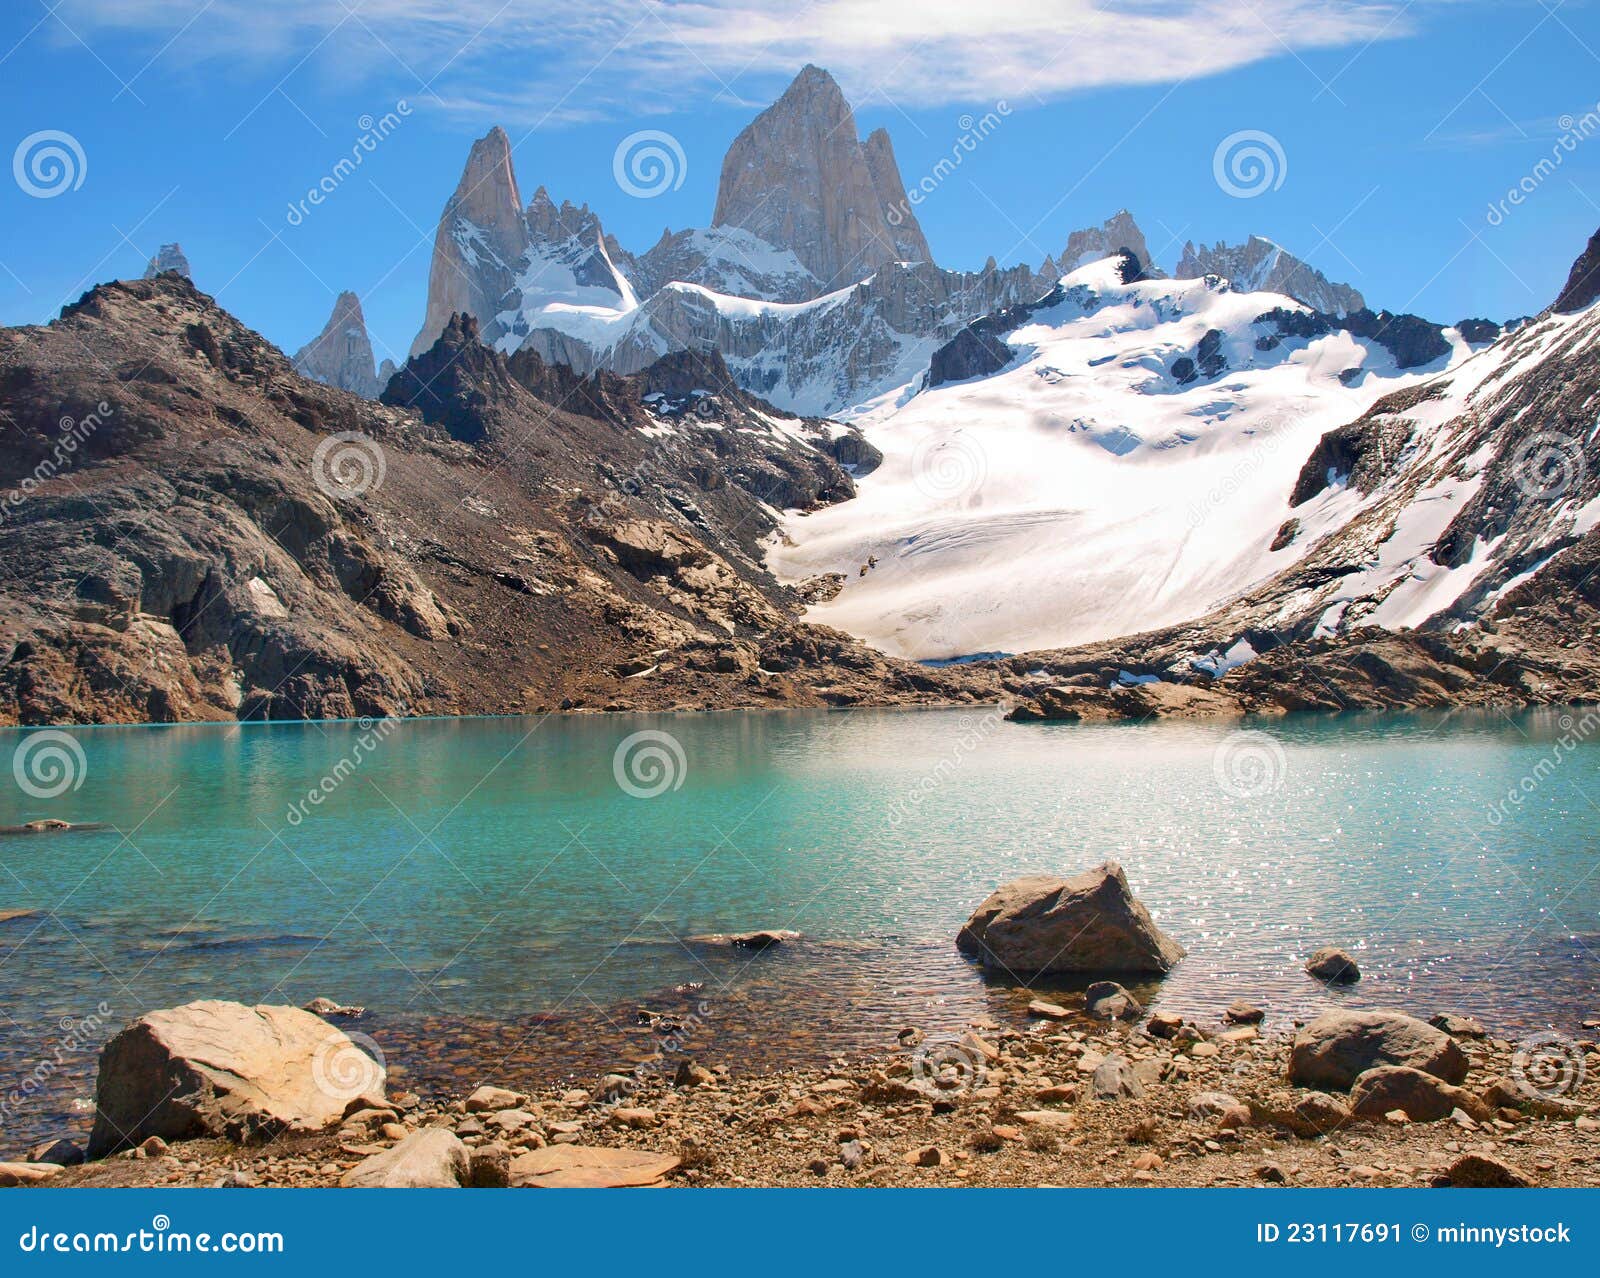 Mountain Landscape with Mt. Fitz Roy in Patagonia Stock Image - Image ...